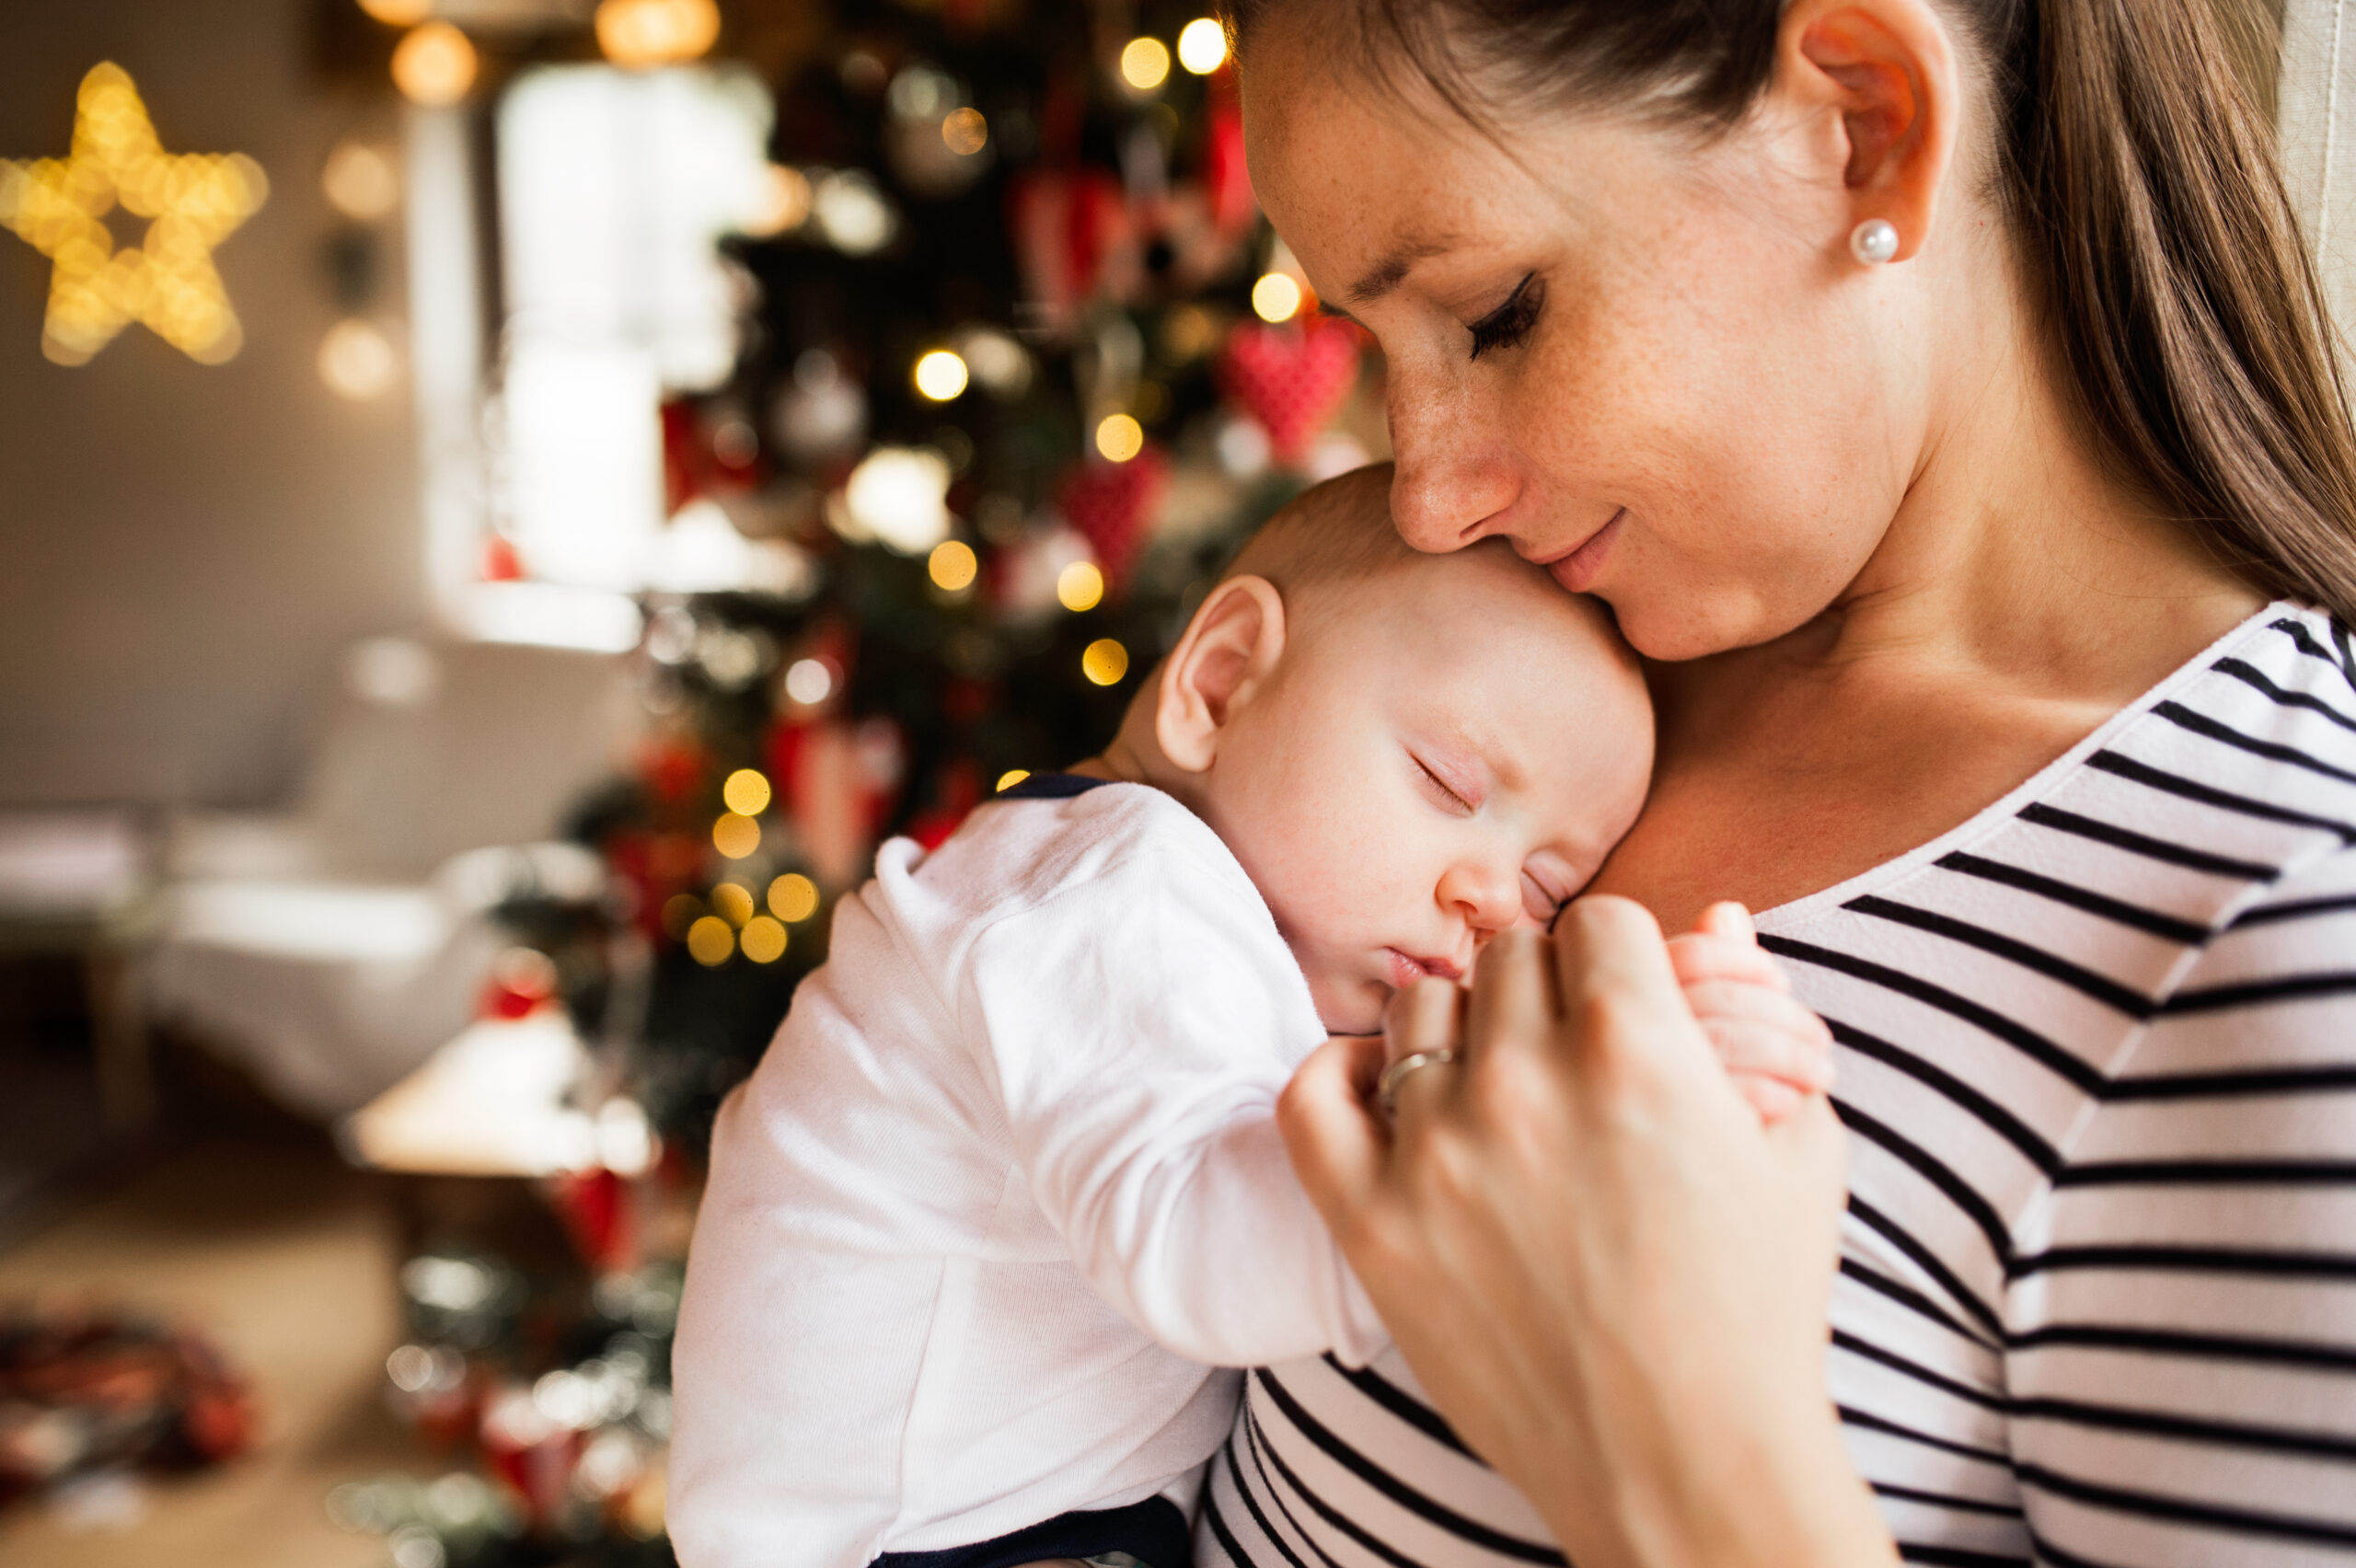 A women holds a sleeping baby with A Christmas tree in the bakground